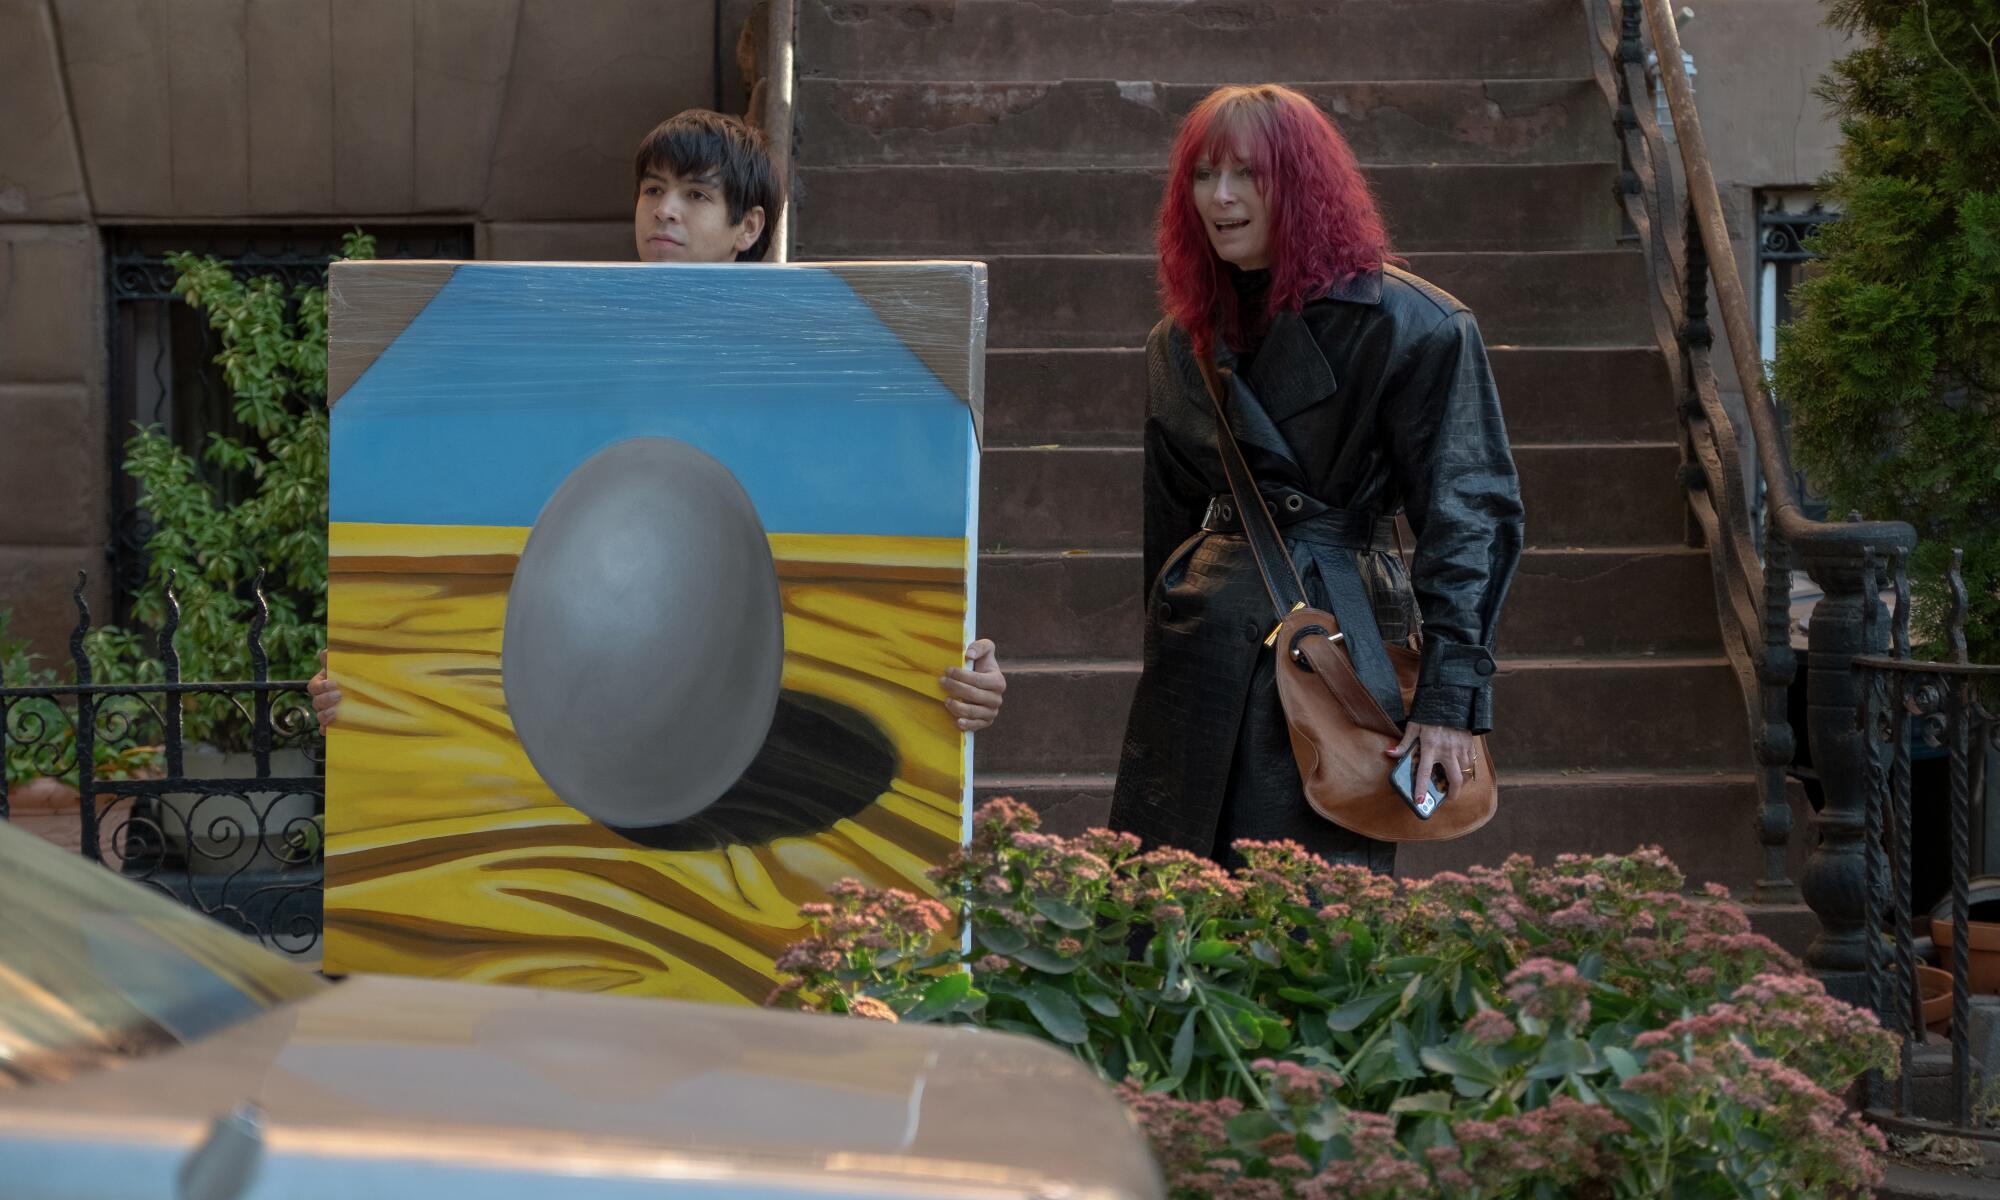 An young man stands holding a painting of an egg next to a red-haired person dressed in black leather.